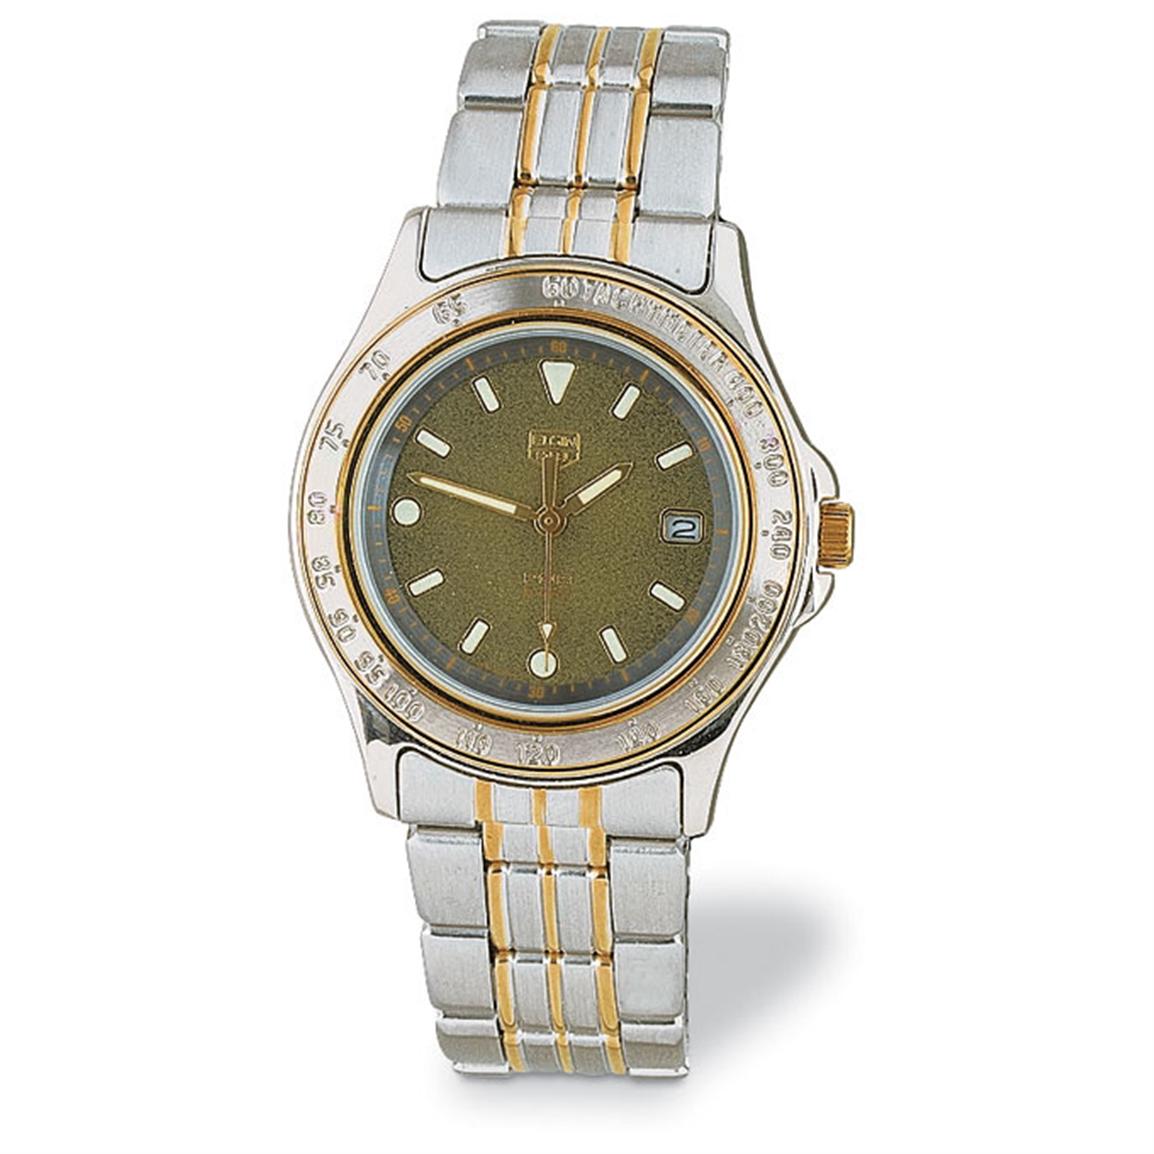 Elgin PQS Solar Watch, Stainless Steel 